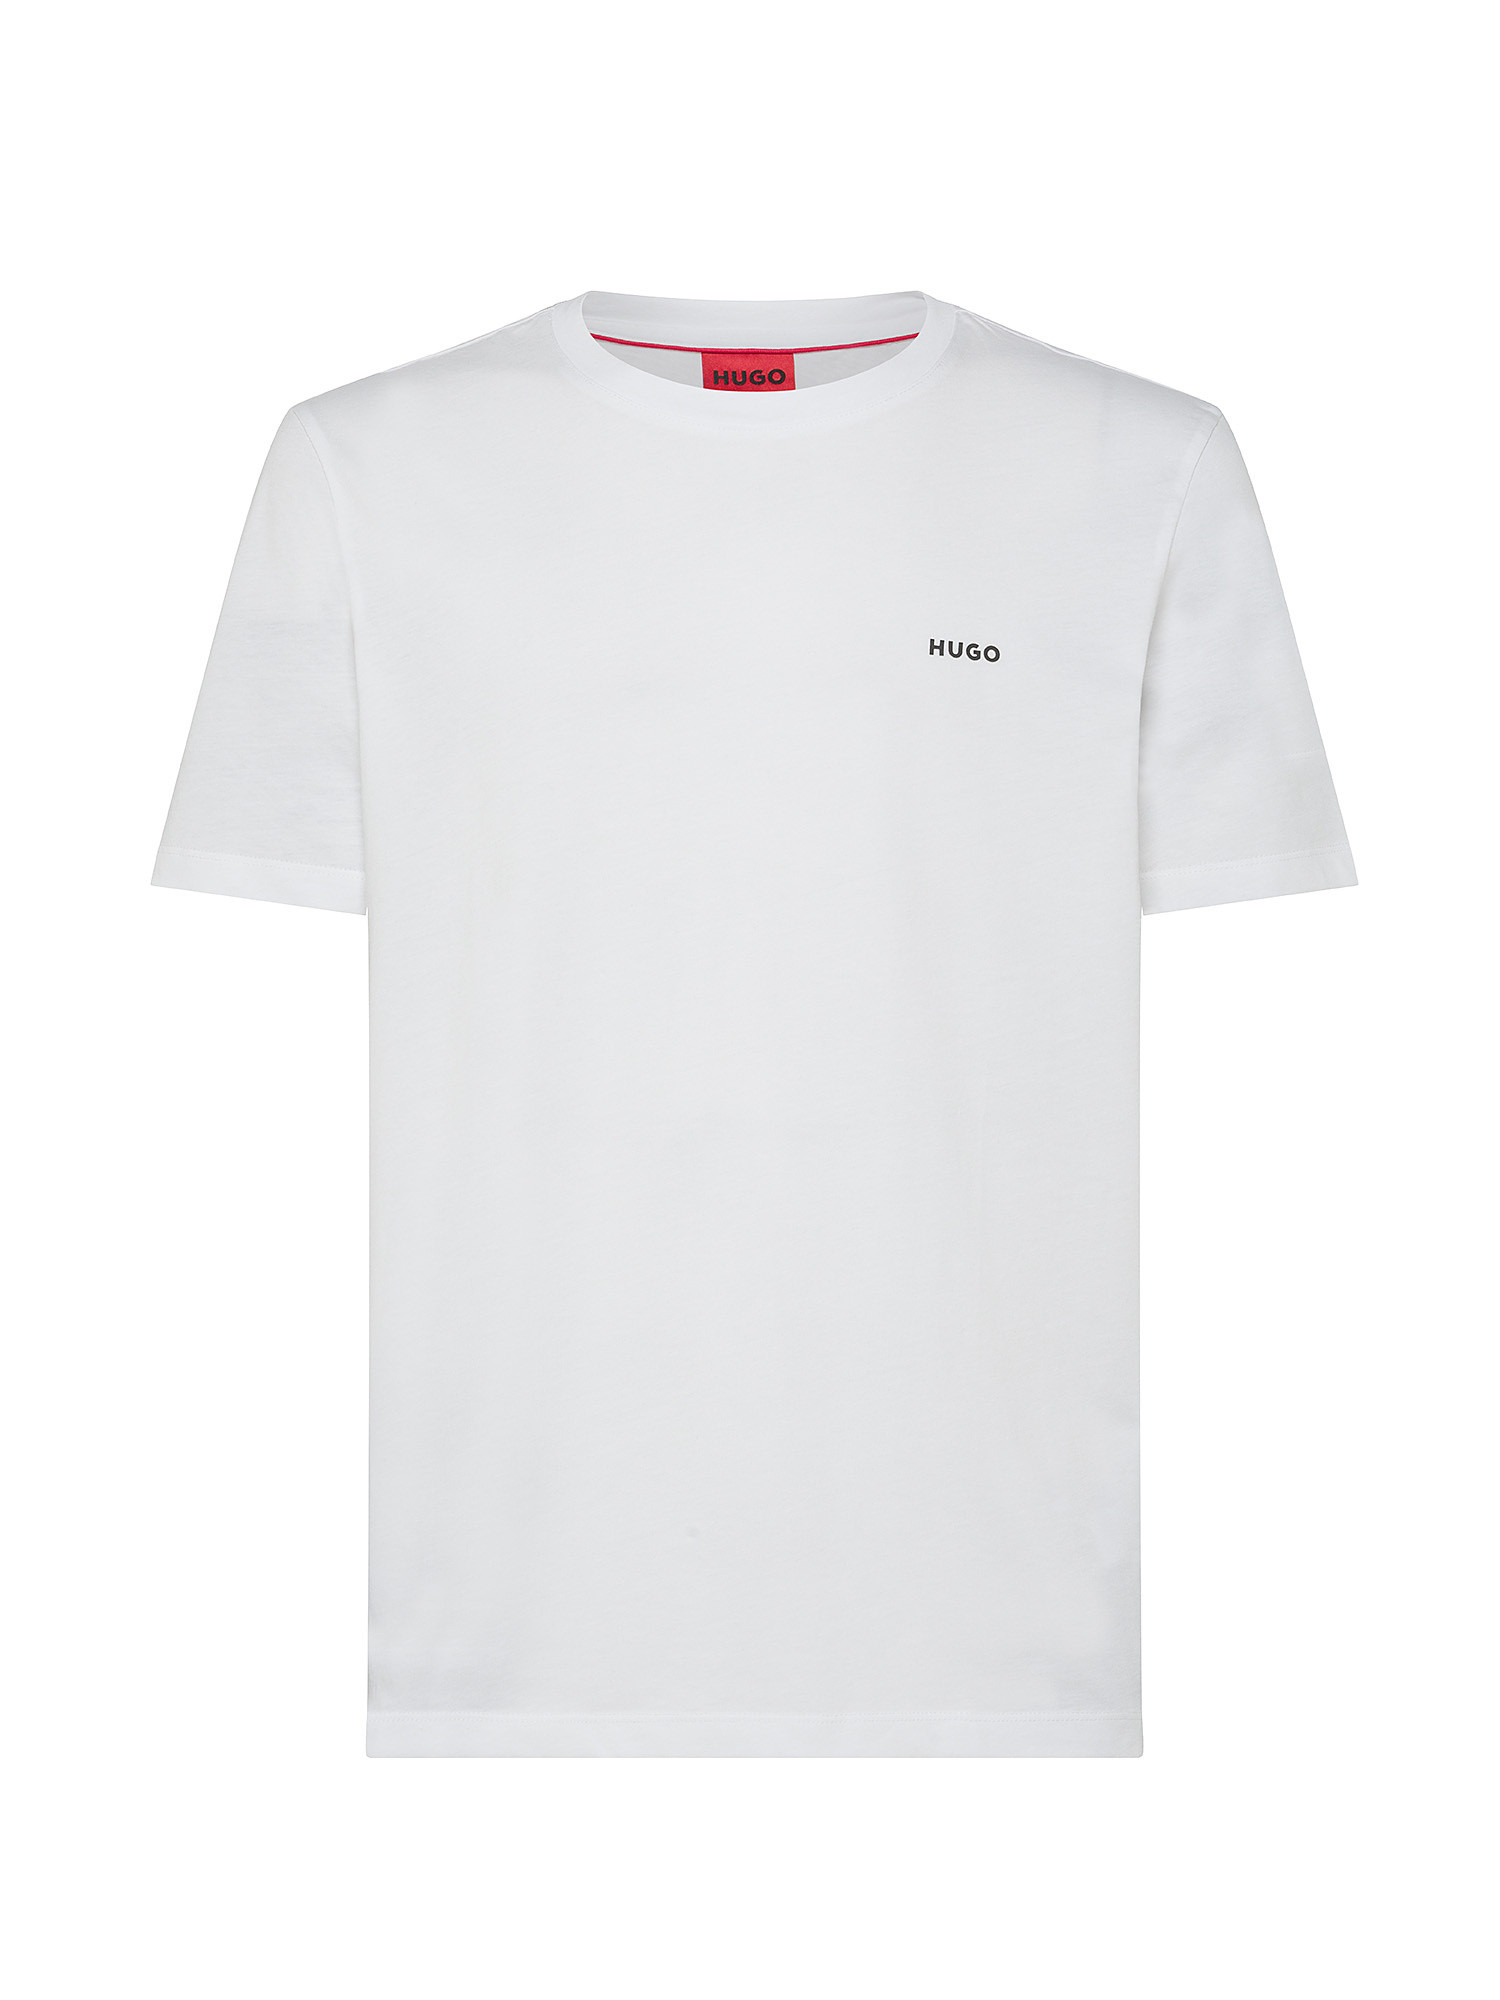 Hugo - T-shirt con logo in cotone, Bianco, large image number 0